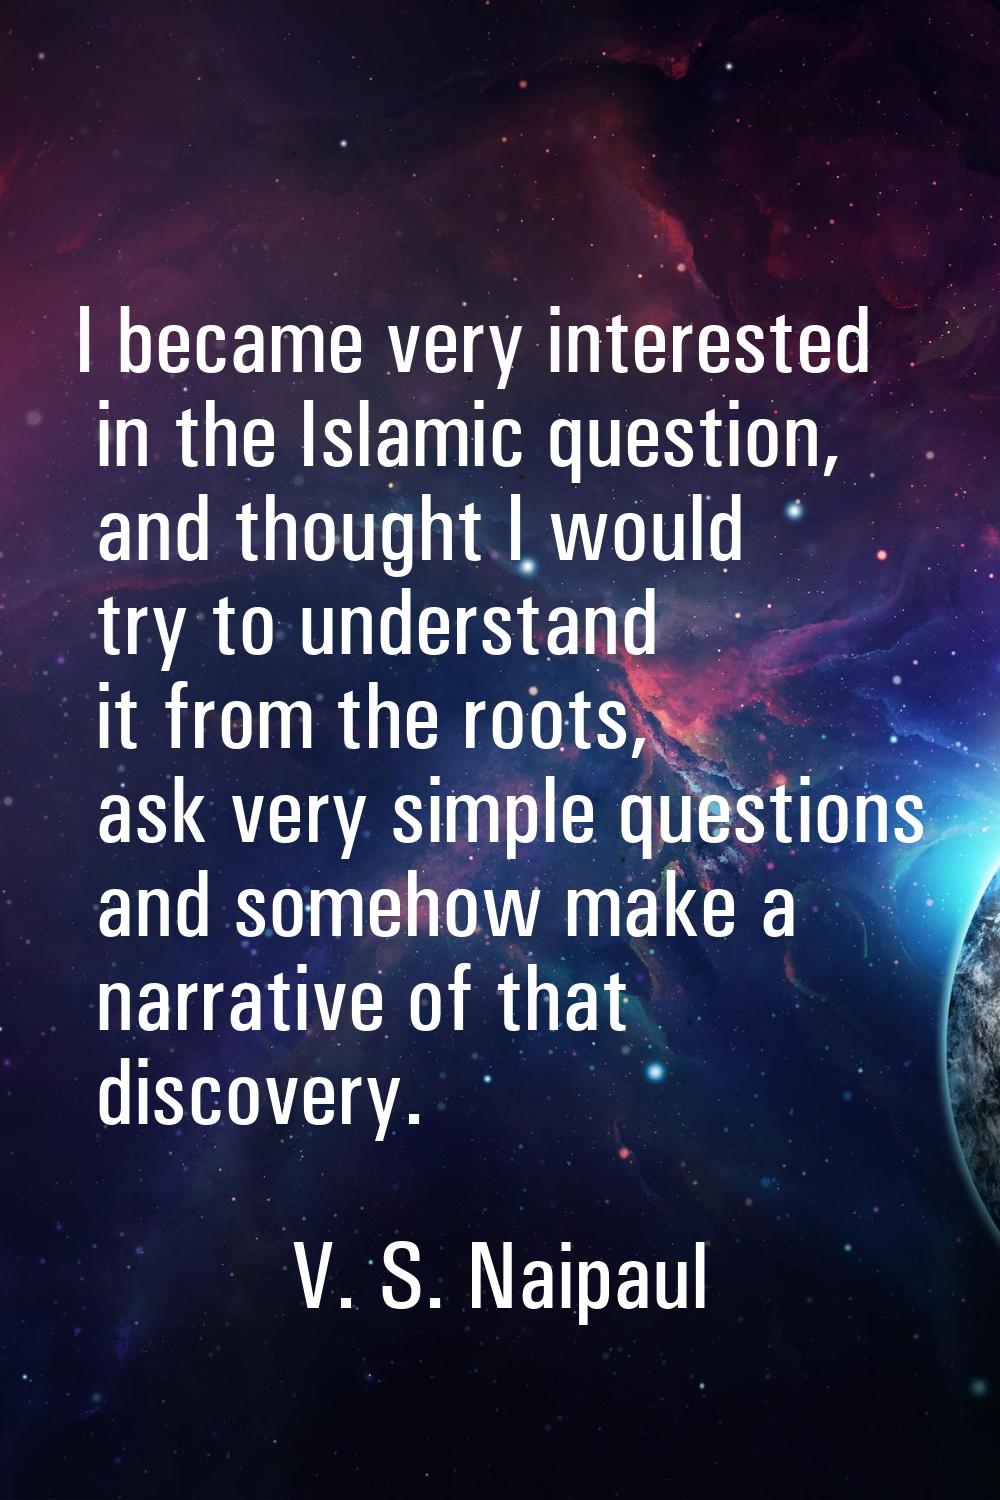 I became very interested in the Islamic question, and thought I would try to understand it from the